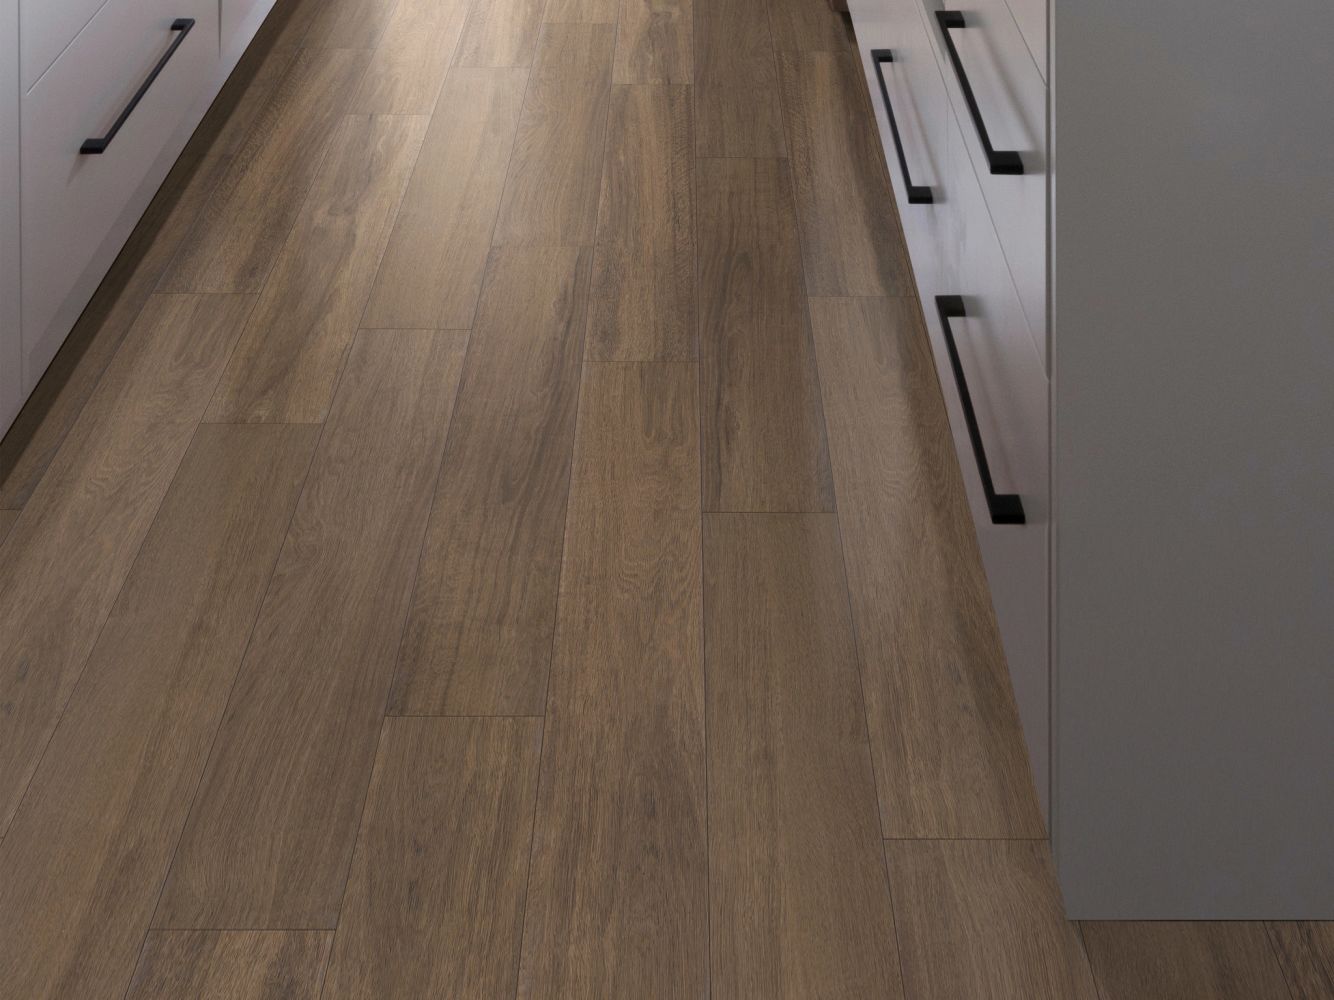 Shaw Floors Resilient Residential Pantheon Hd+ Natural Bevel Cordovan 07233_1051V